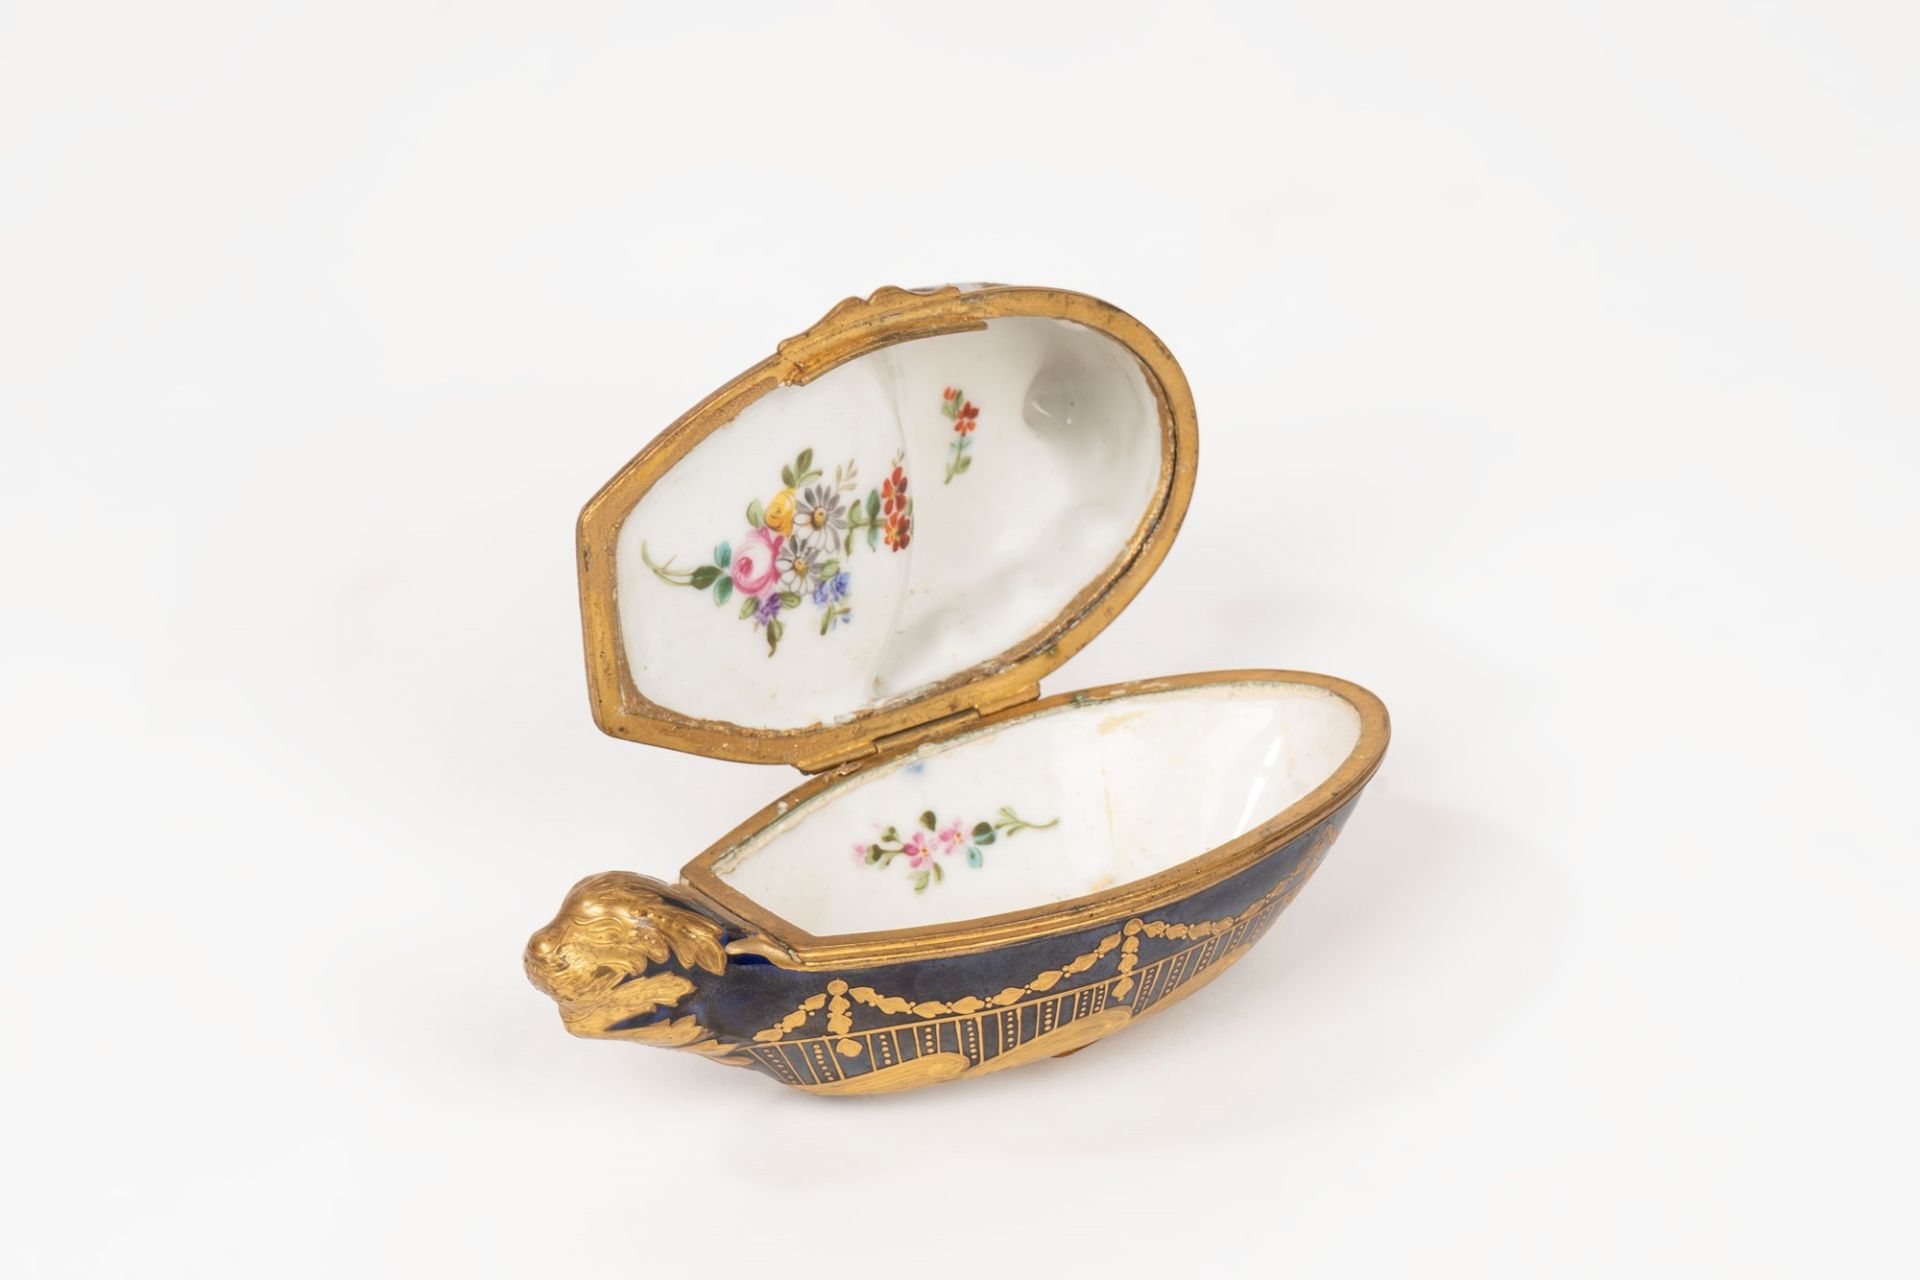 Snuffbox in polychrome porcelain and gilded bronze finishes, Sevres manufacture, late 19th century - Image 2 of 3